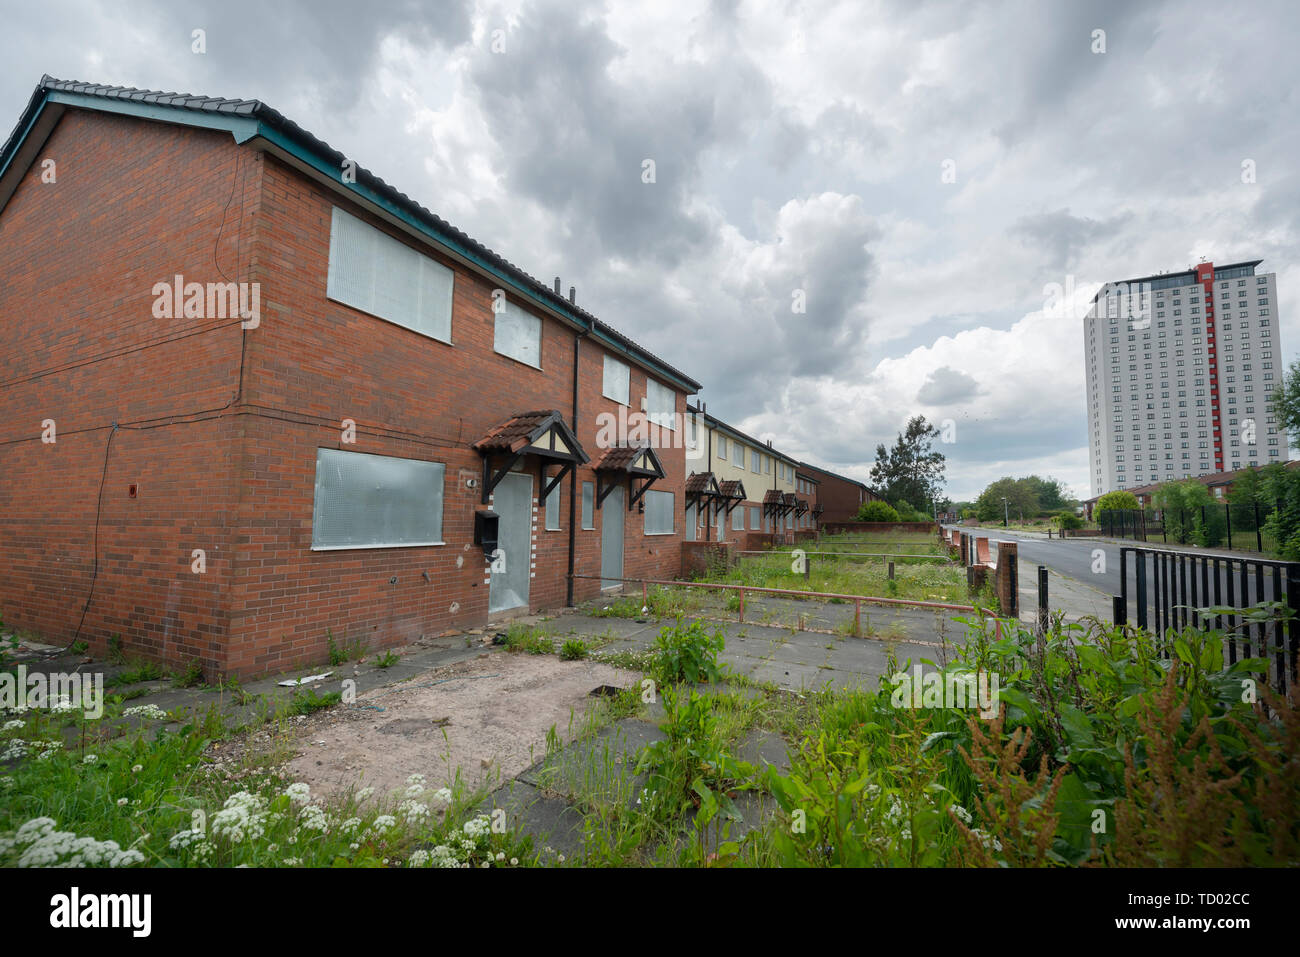 Boarded up houses on the High Street Estate area of Pendleton in Salford, which are awaiting demolition. Stock Photo